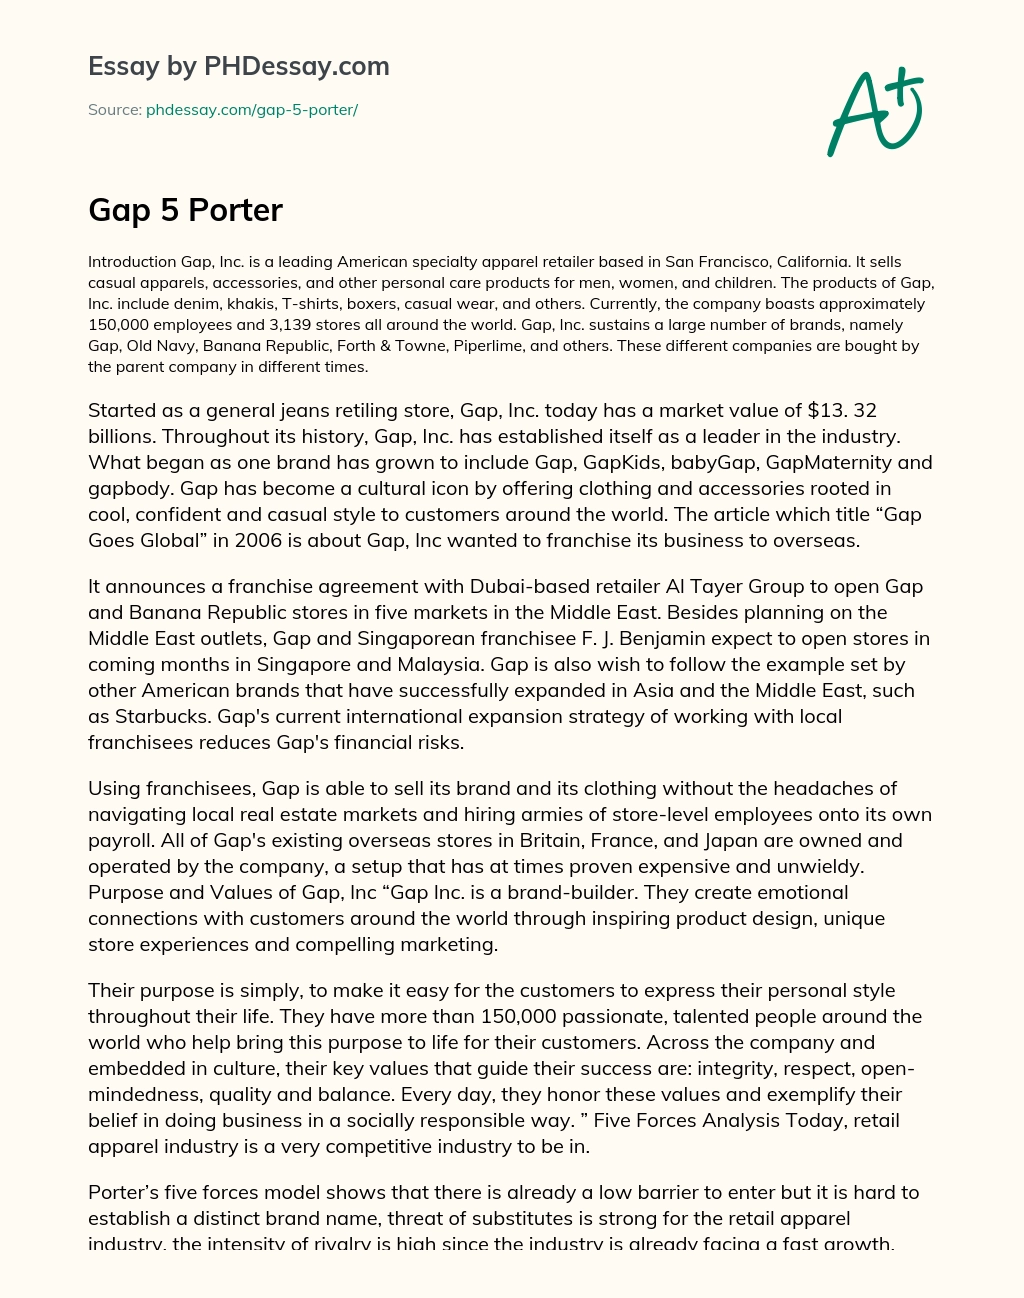 Introduction to Gap, Inc.: A Leading American Apparel Retailer essay